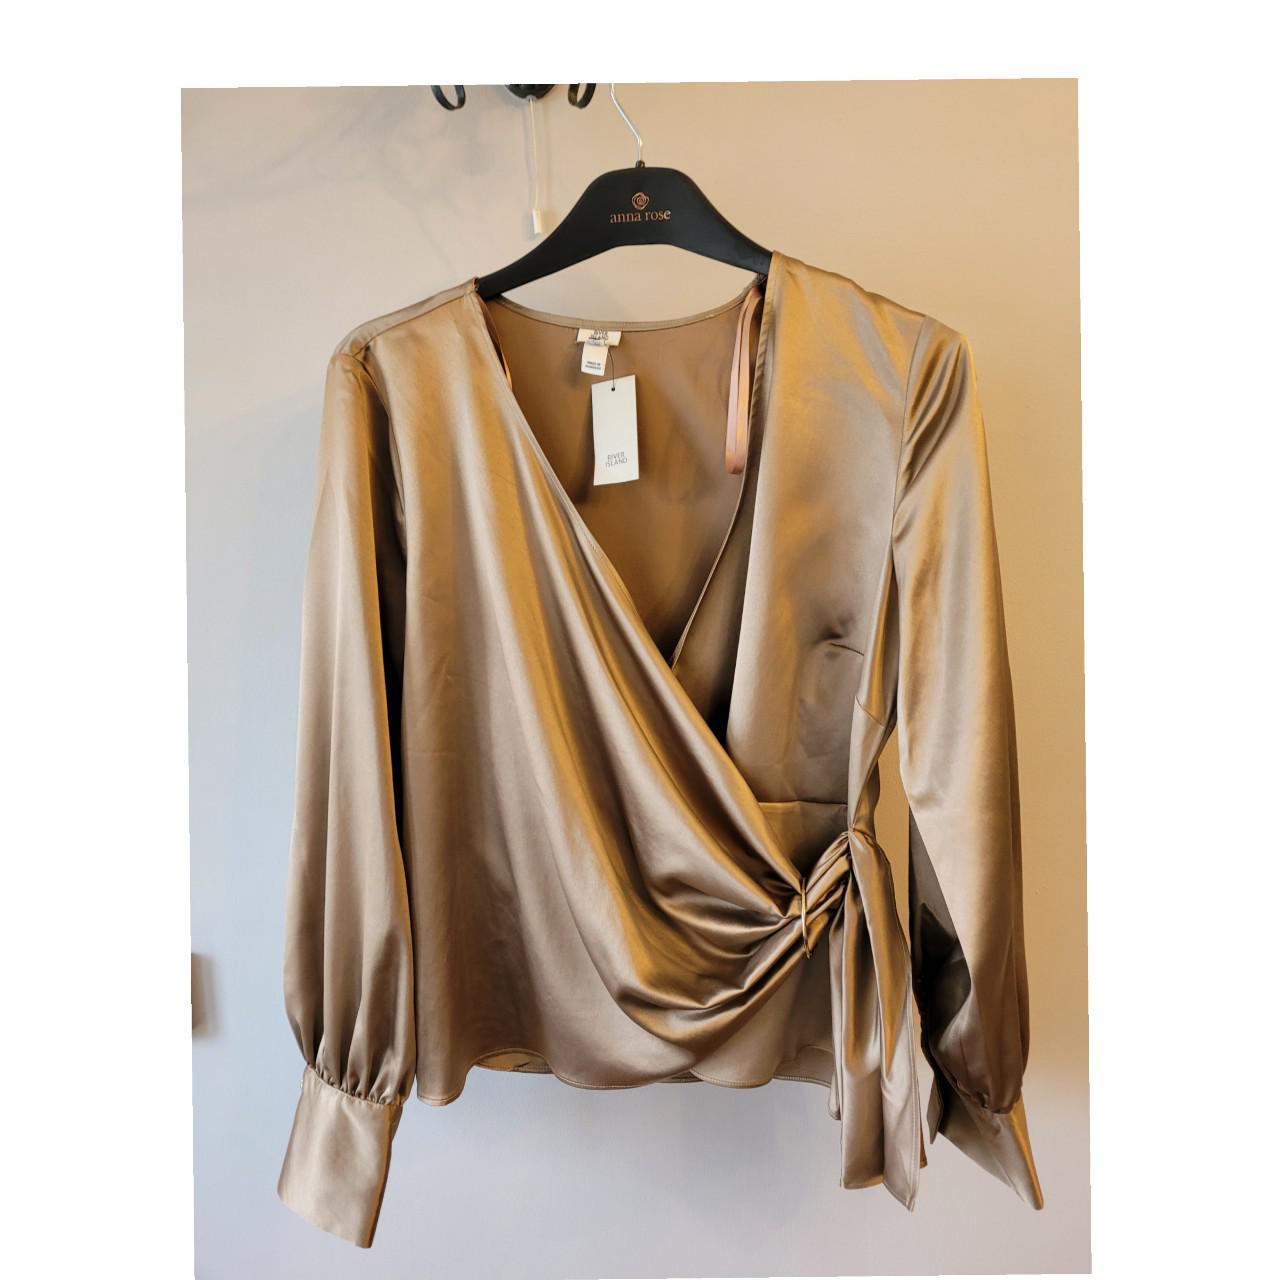 River Island Women's Gold and Tan Blouse